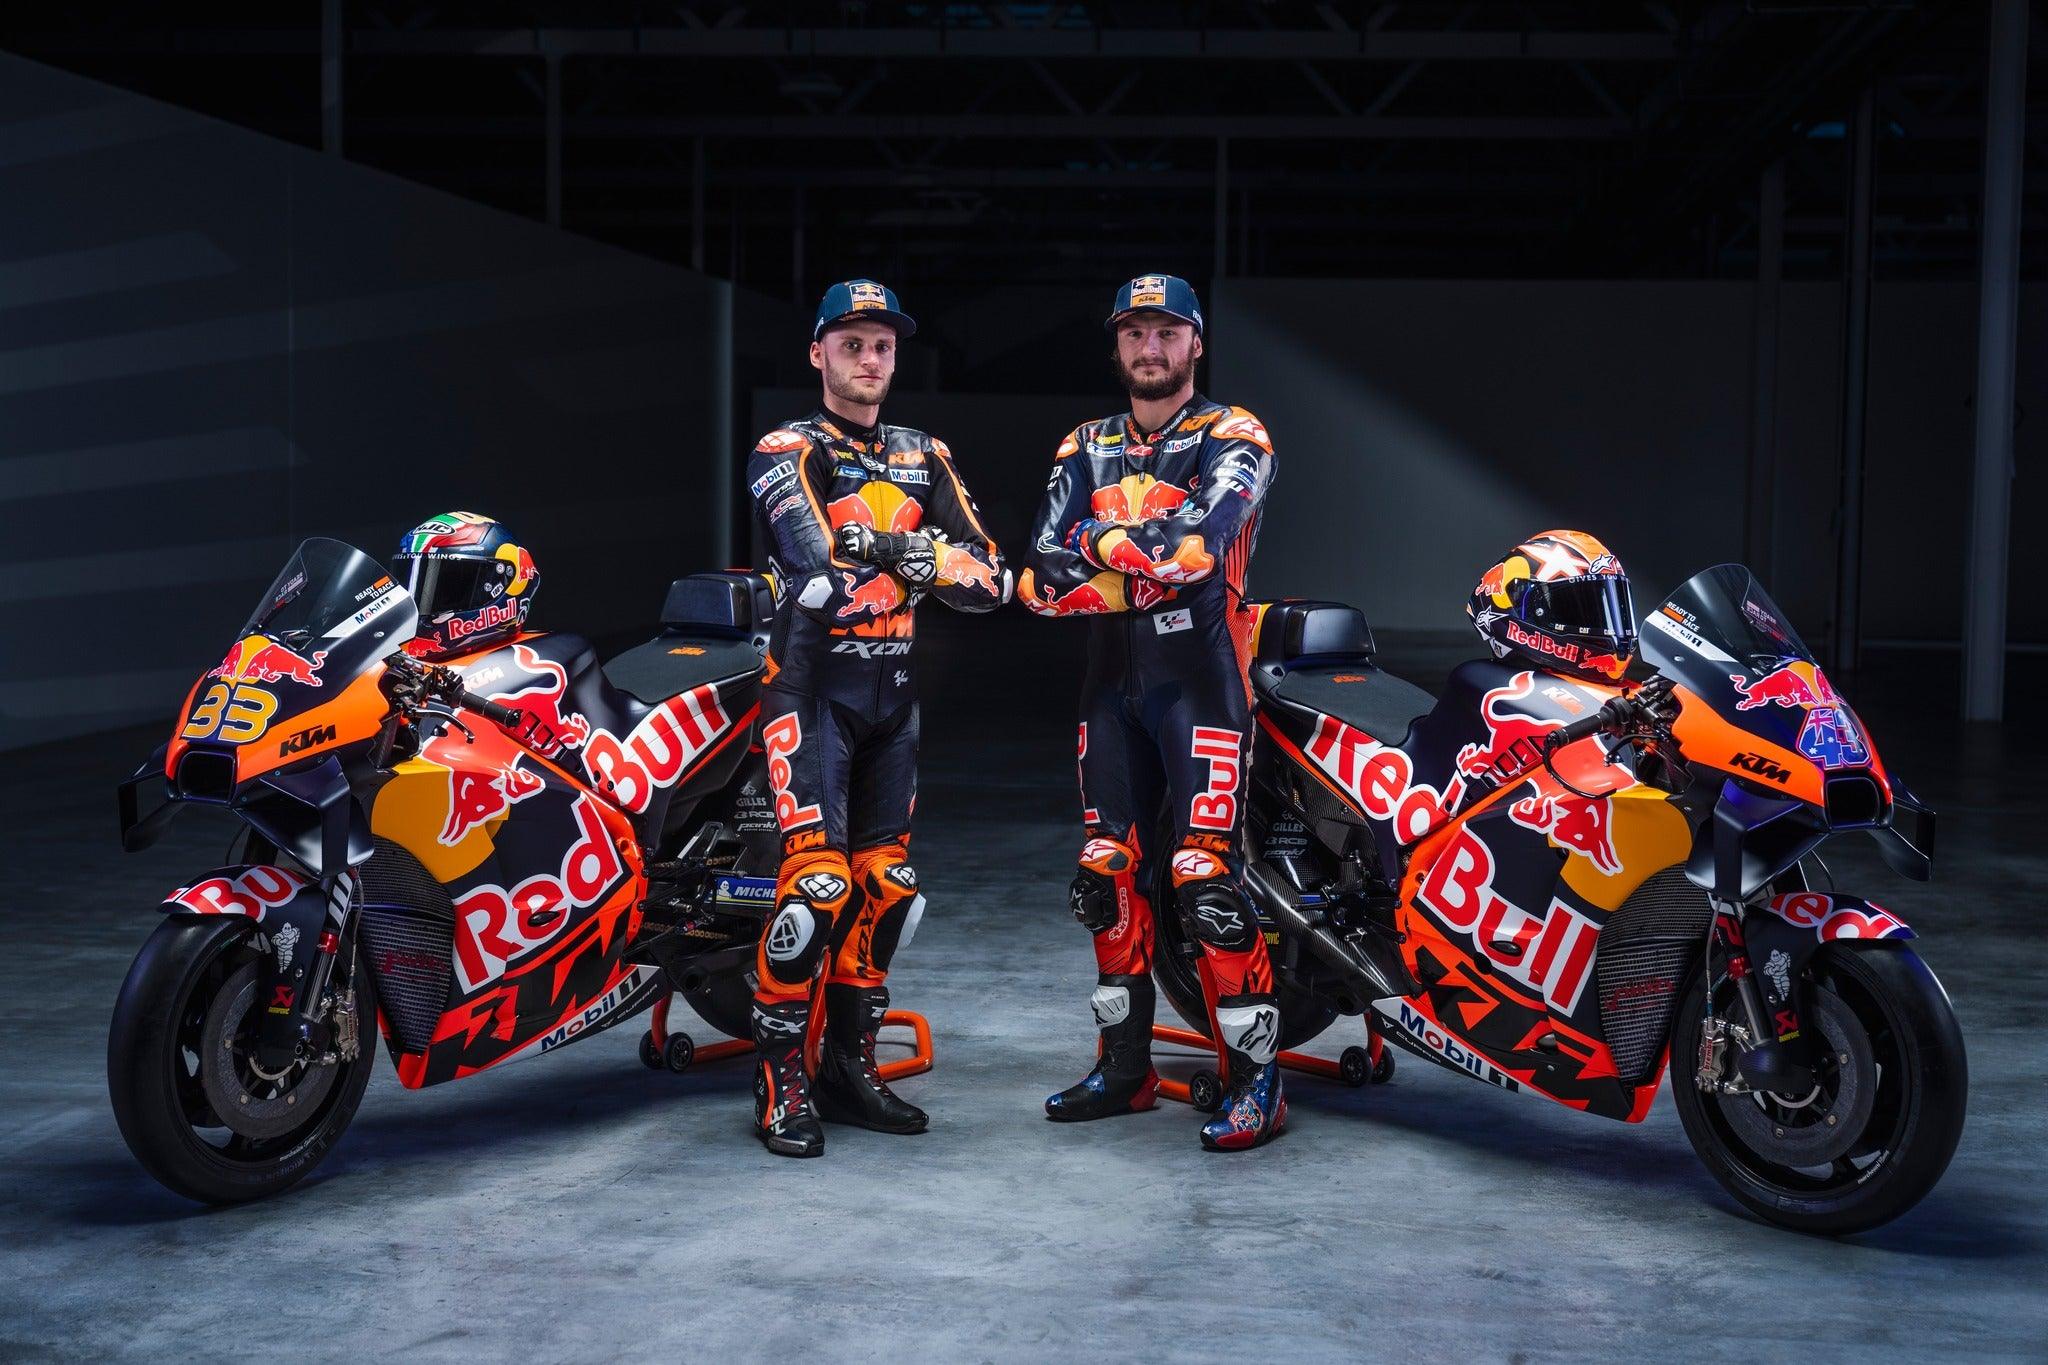 KTM have unveiled the new 2023 livery and riders with Jack Miller being unveiled in KTM colours for the first time! - MotoProWorks